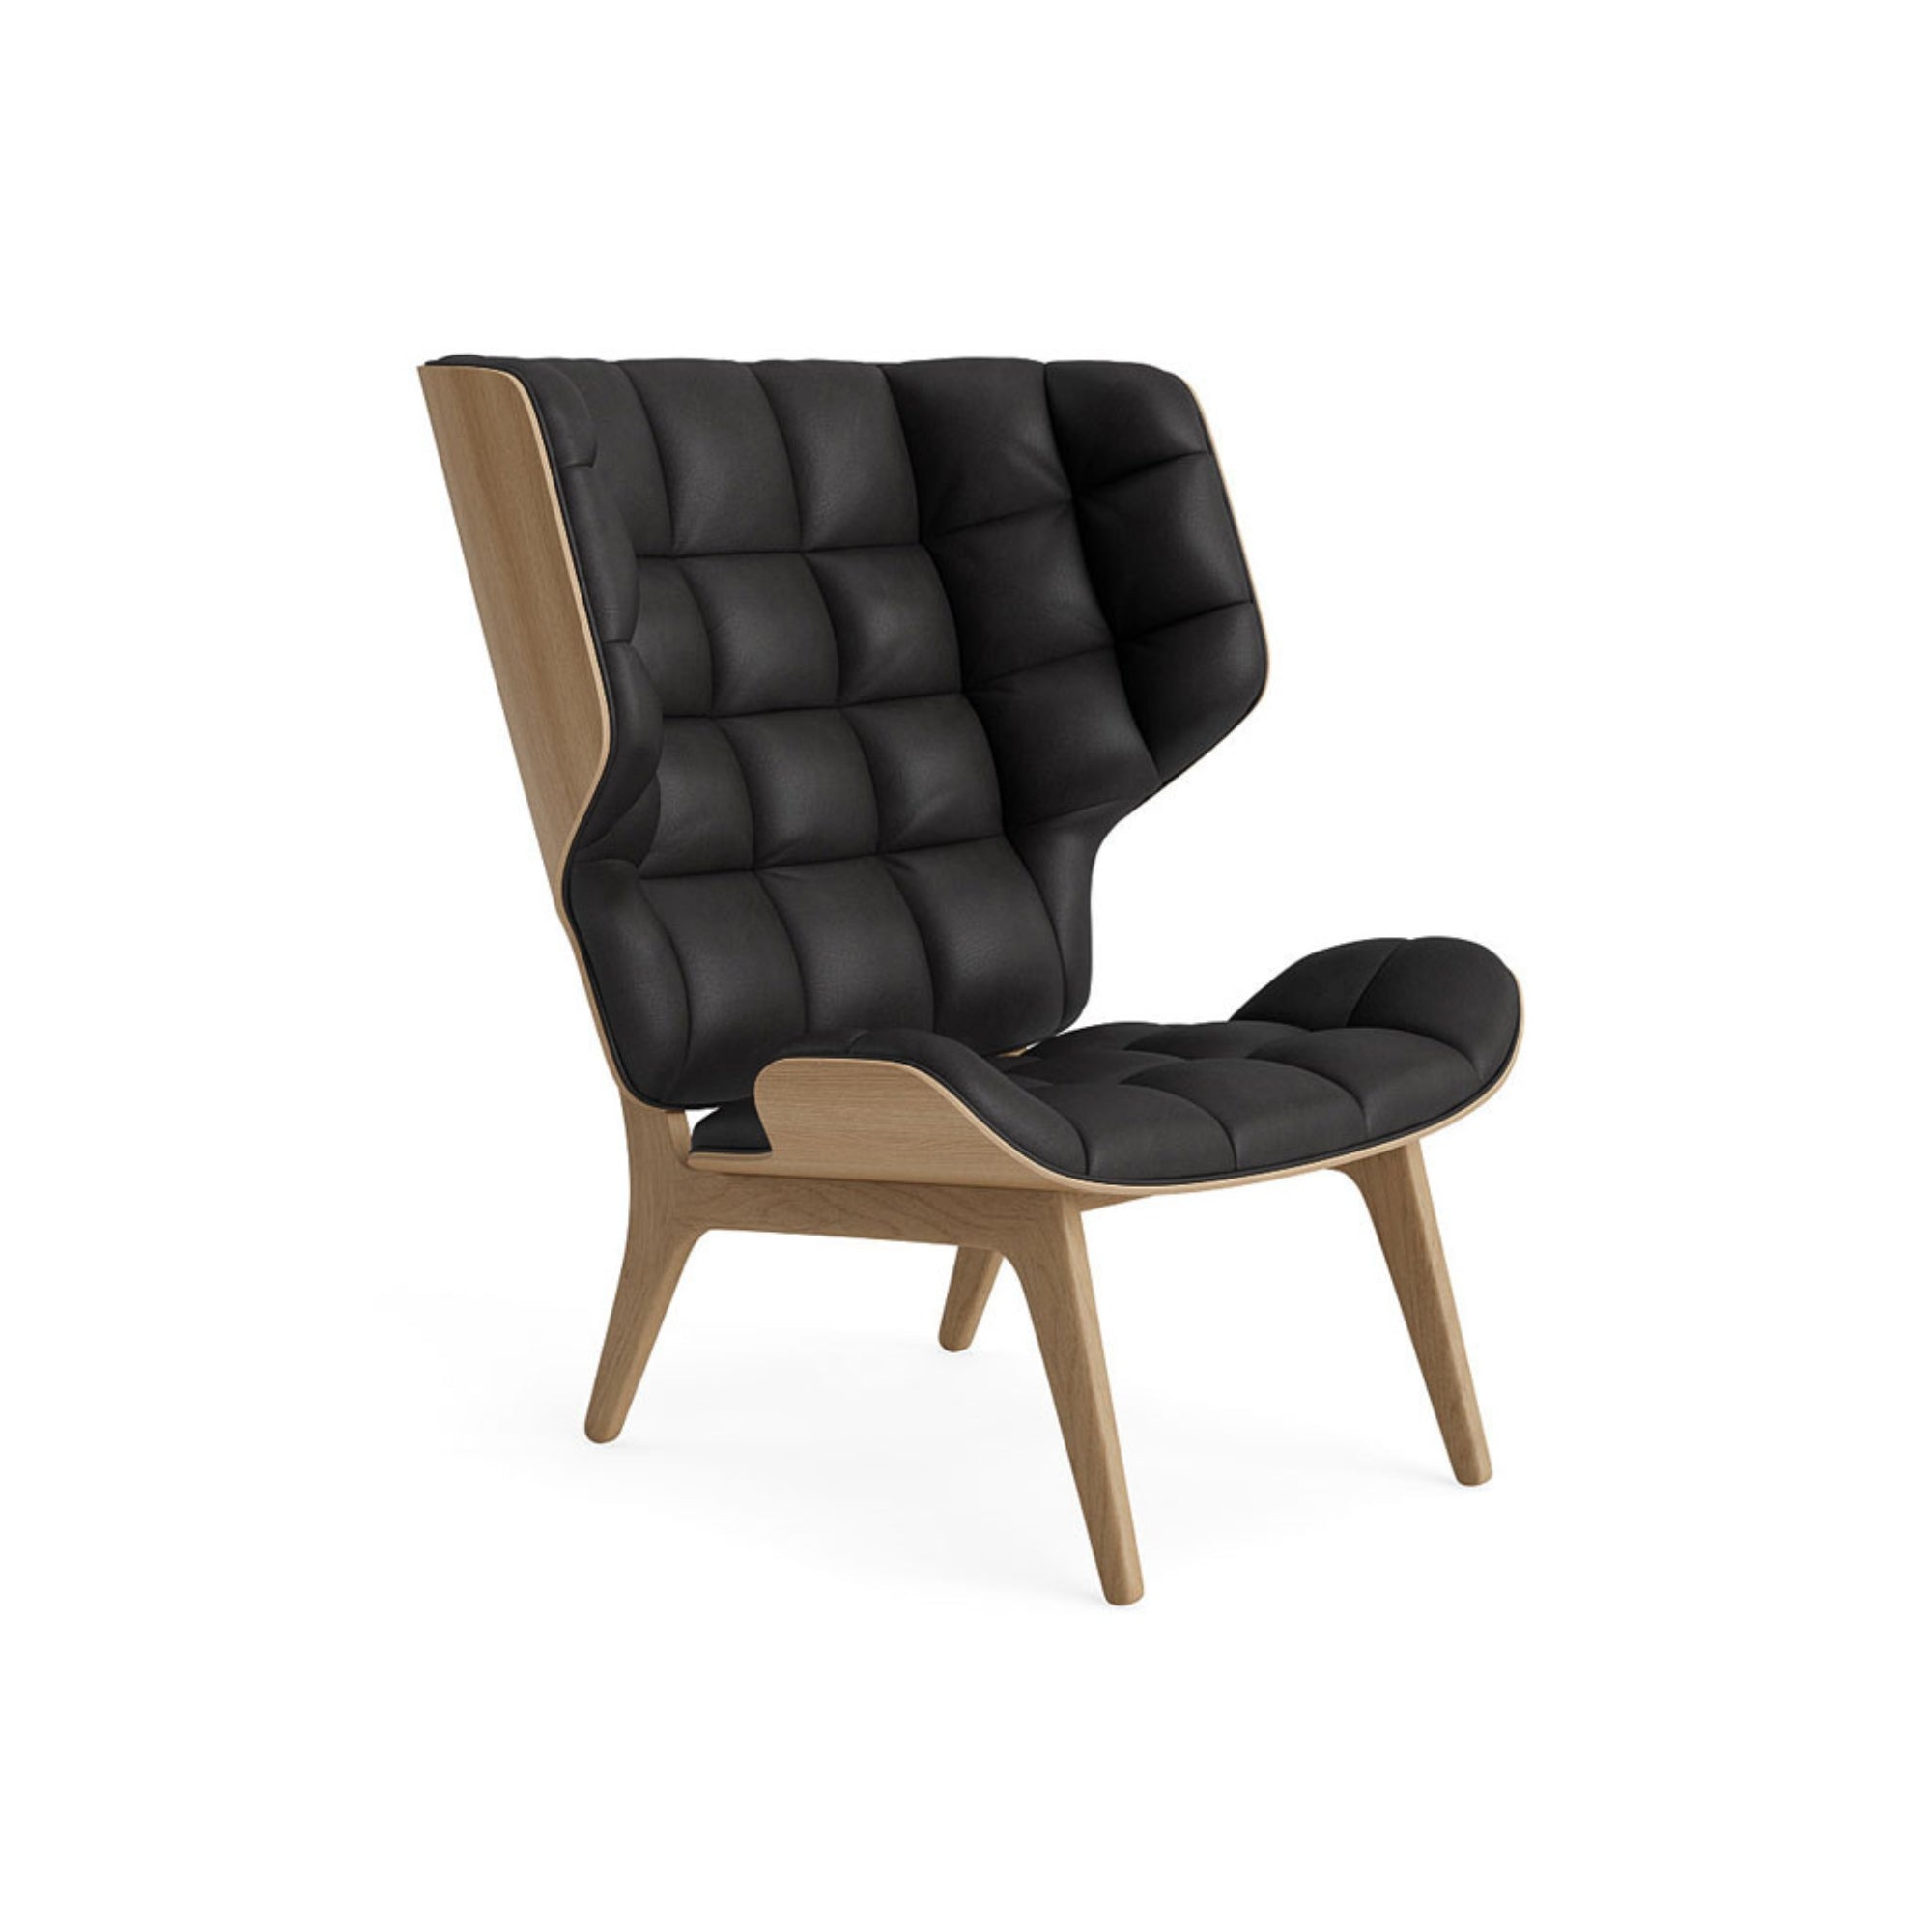 Mammoth Chair - Leather